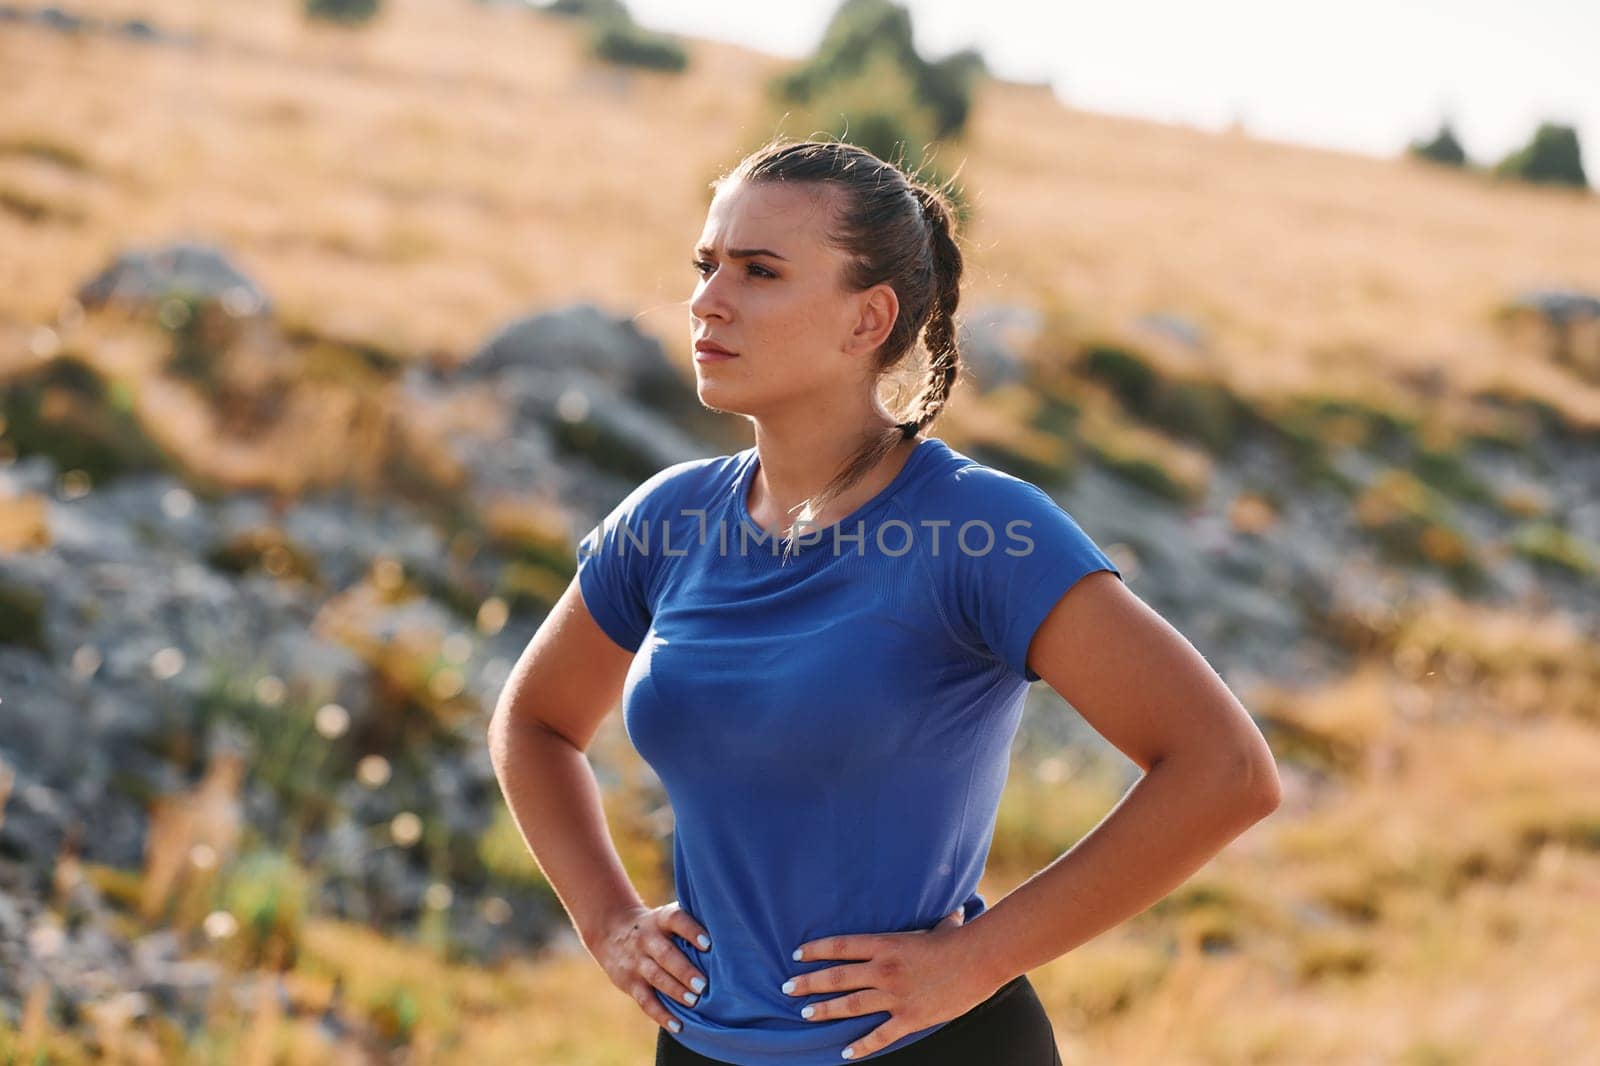 A determined female athlete is captured in preparation mode for her morning run, showcasing dedication and focus in her fitness routine